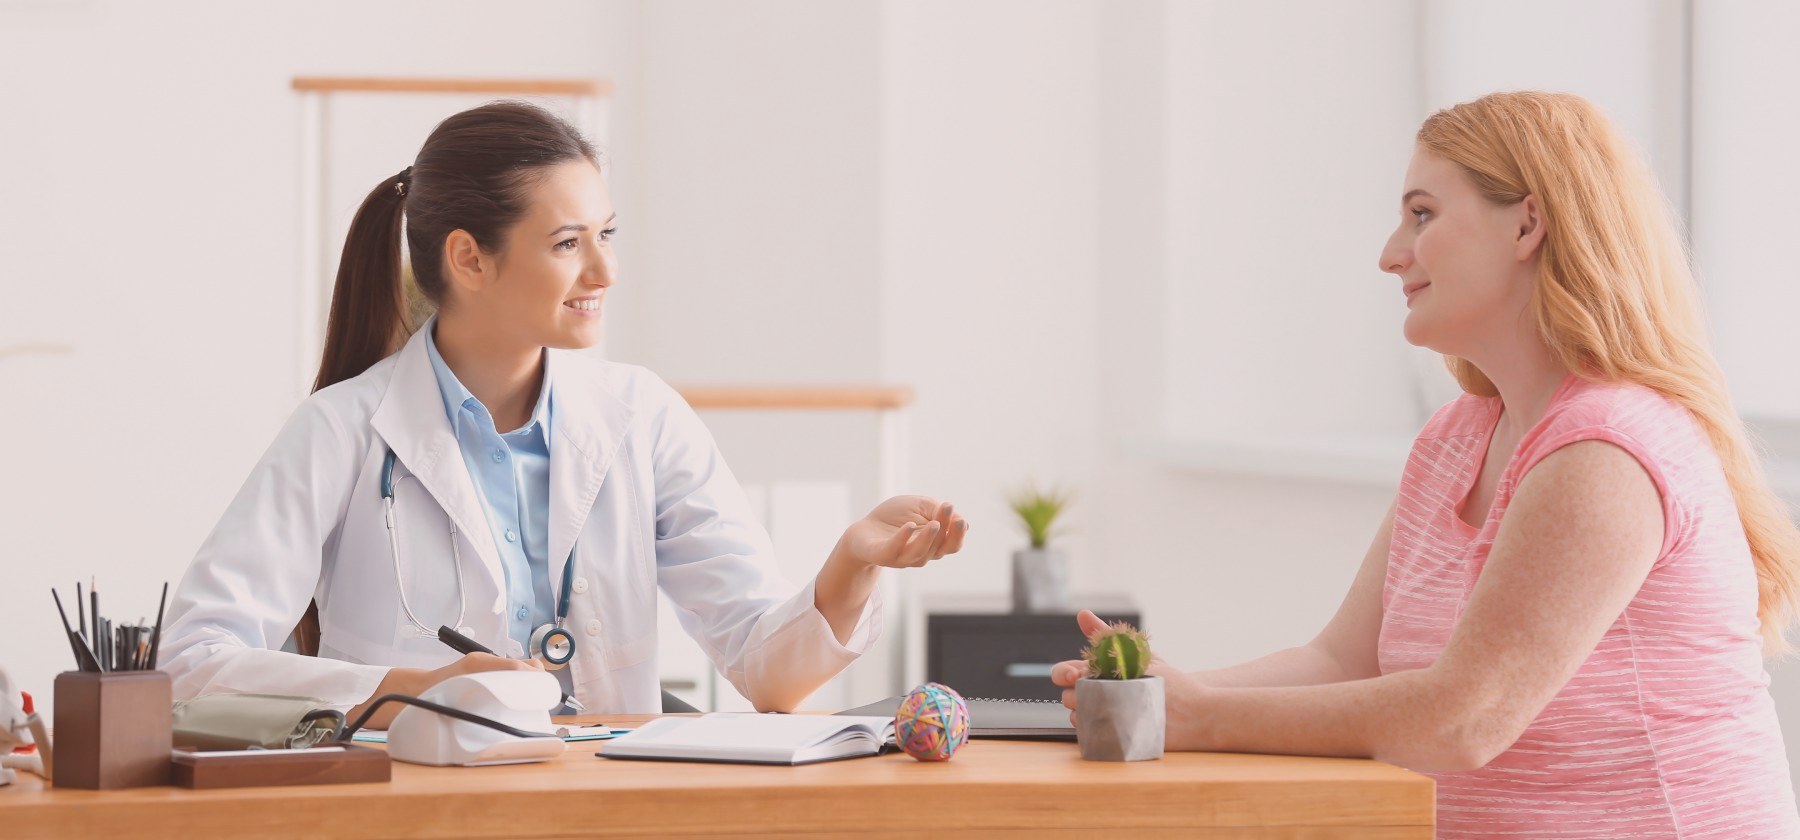 A woman engaging in a consultation with a doctor